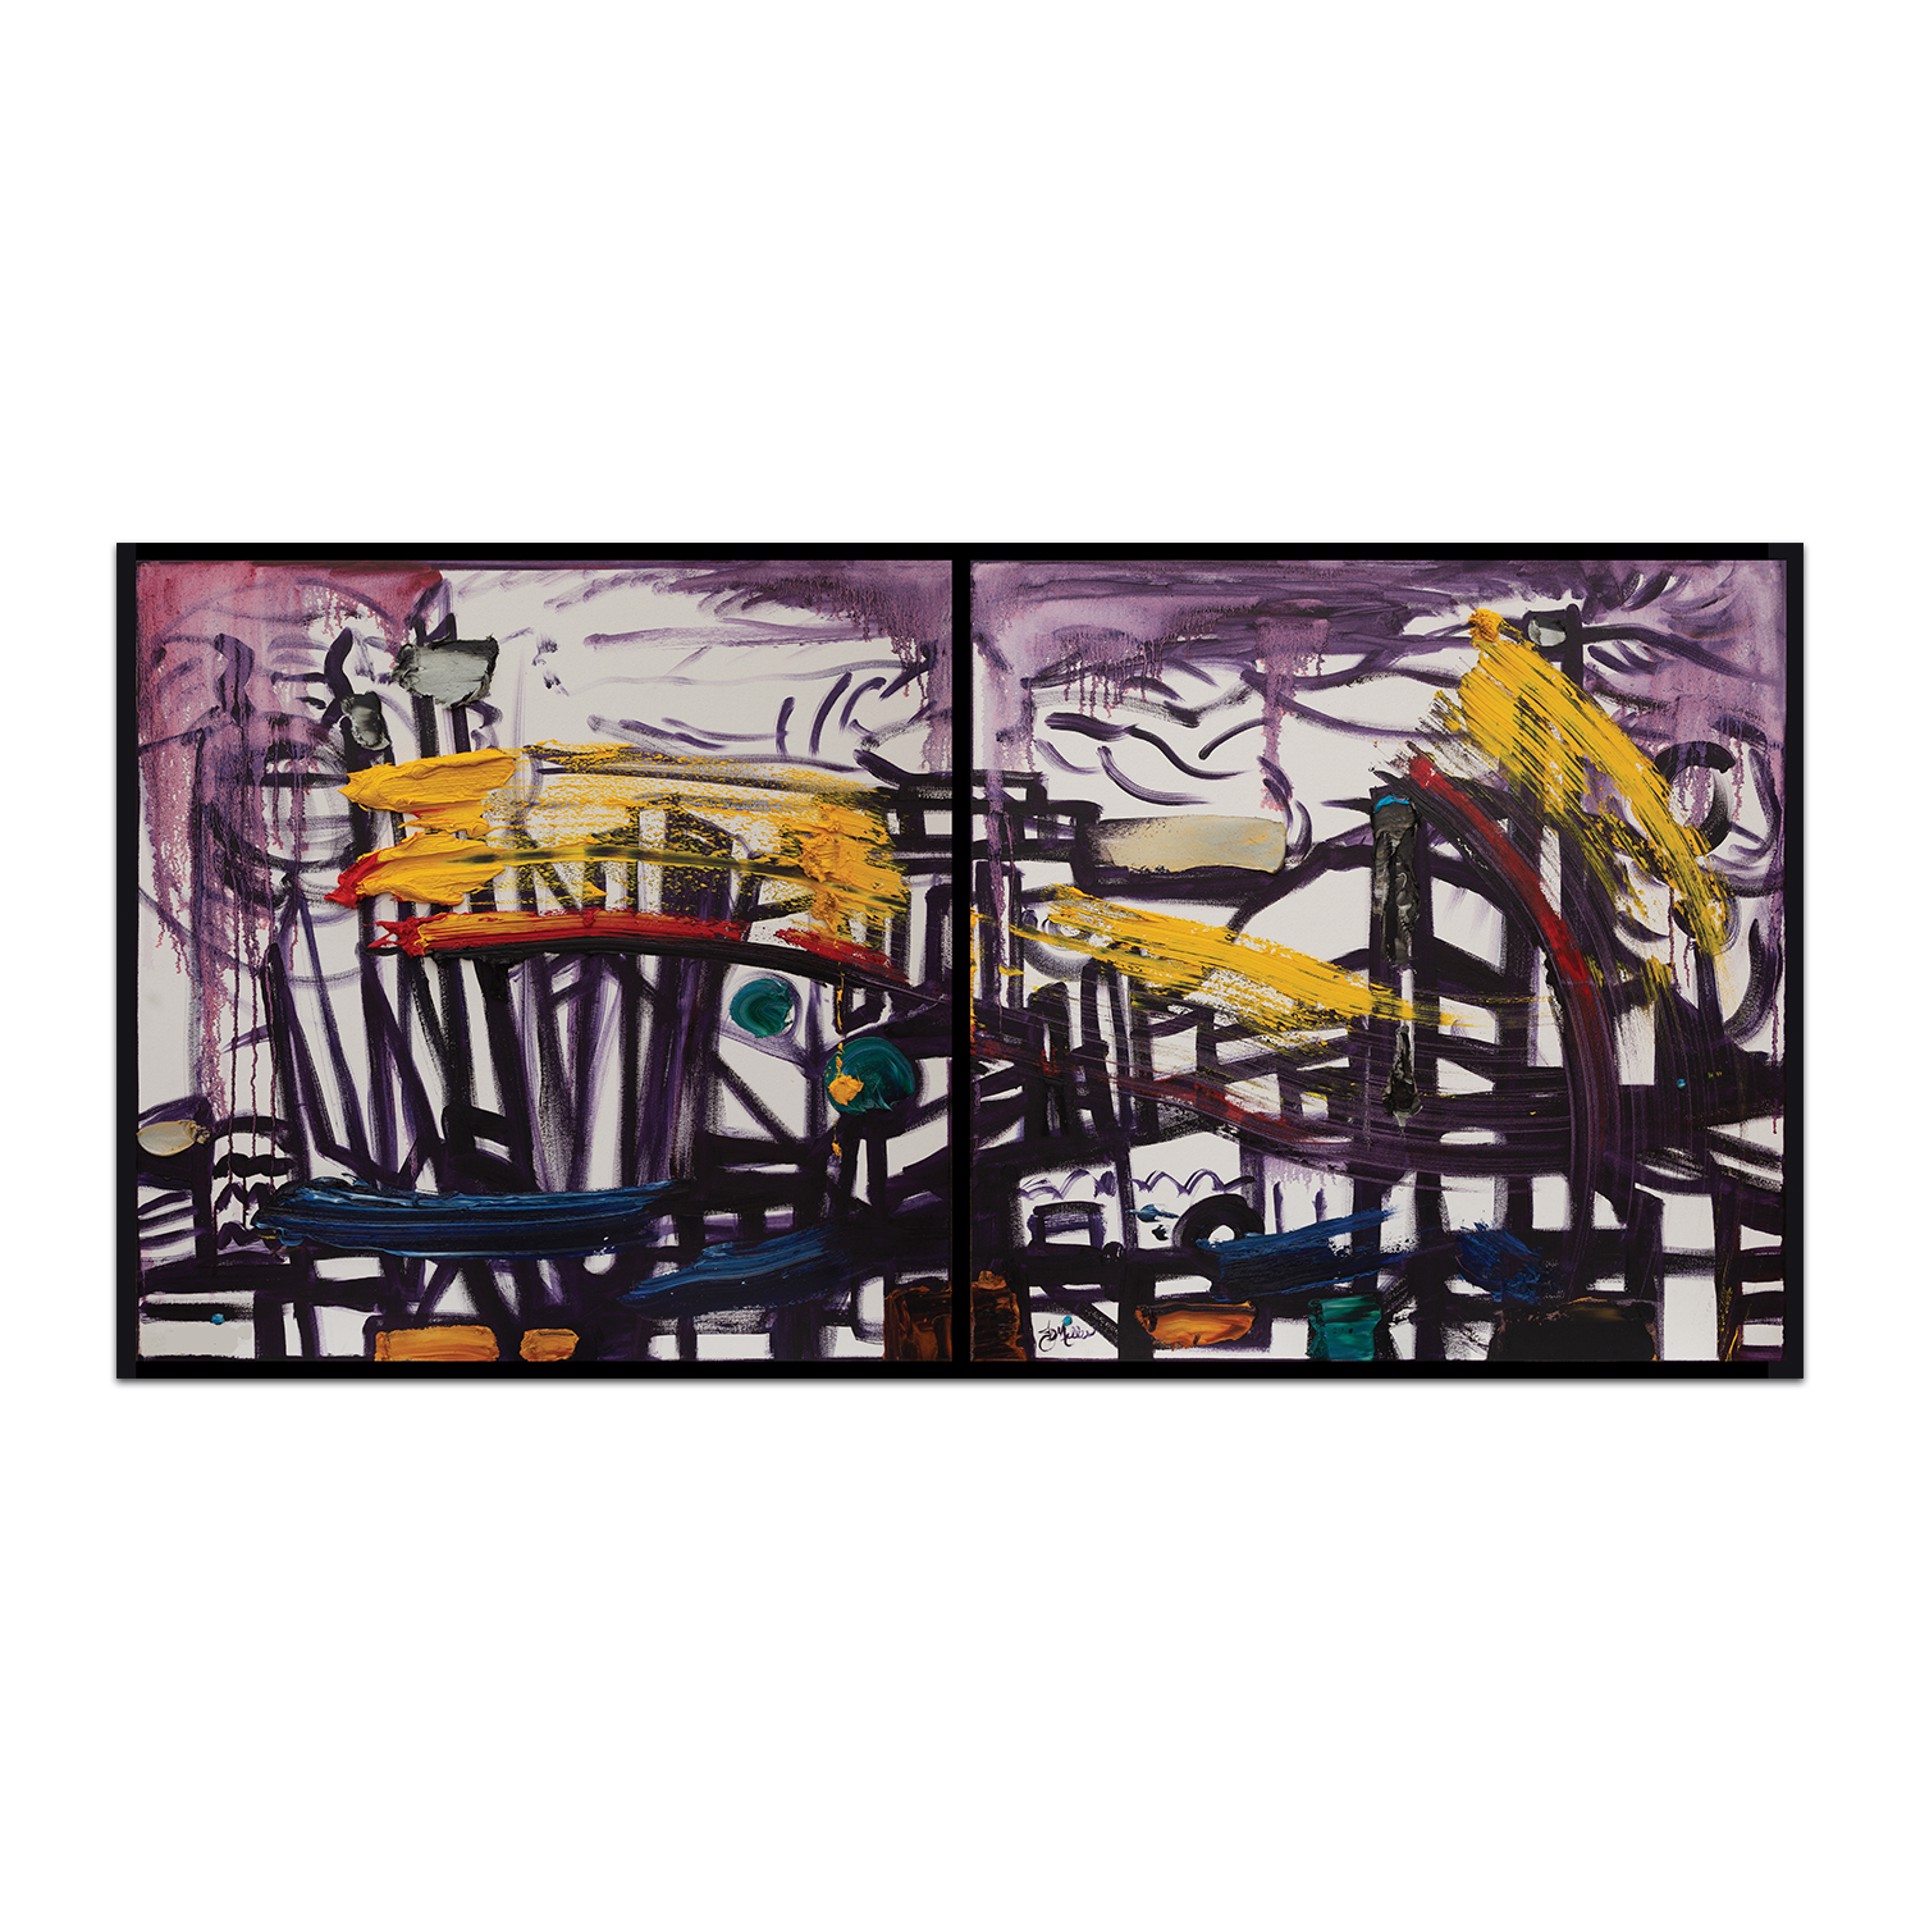 Roller Coaster Diptych by JD Miller